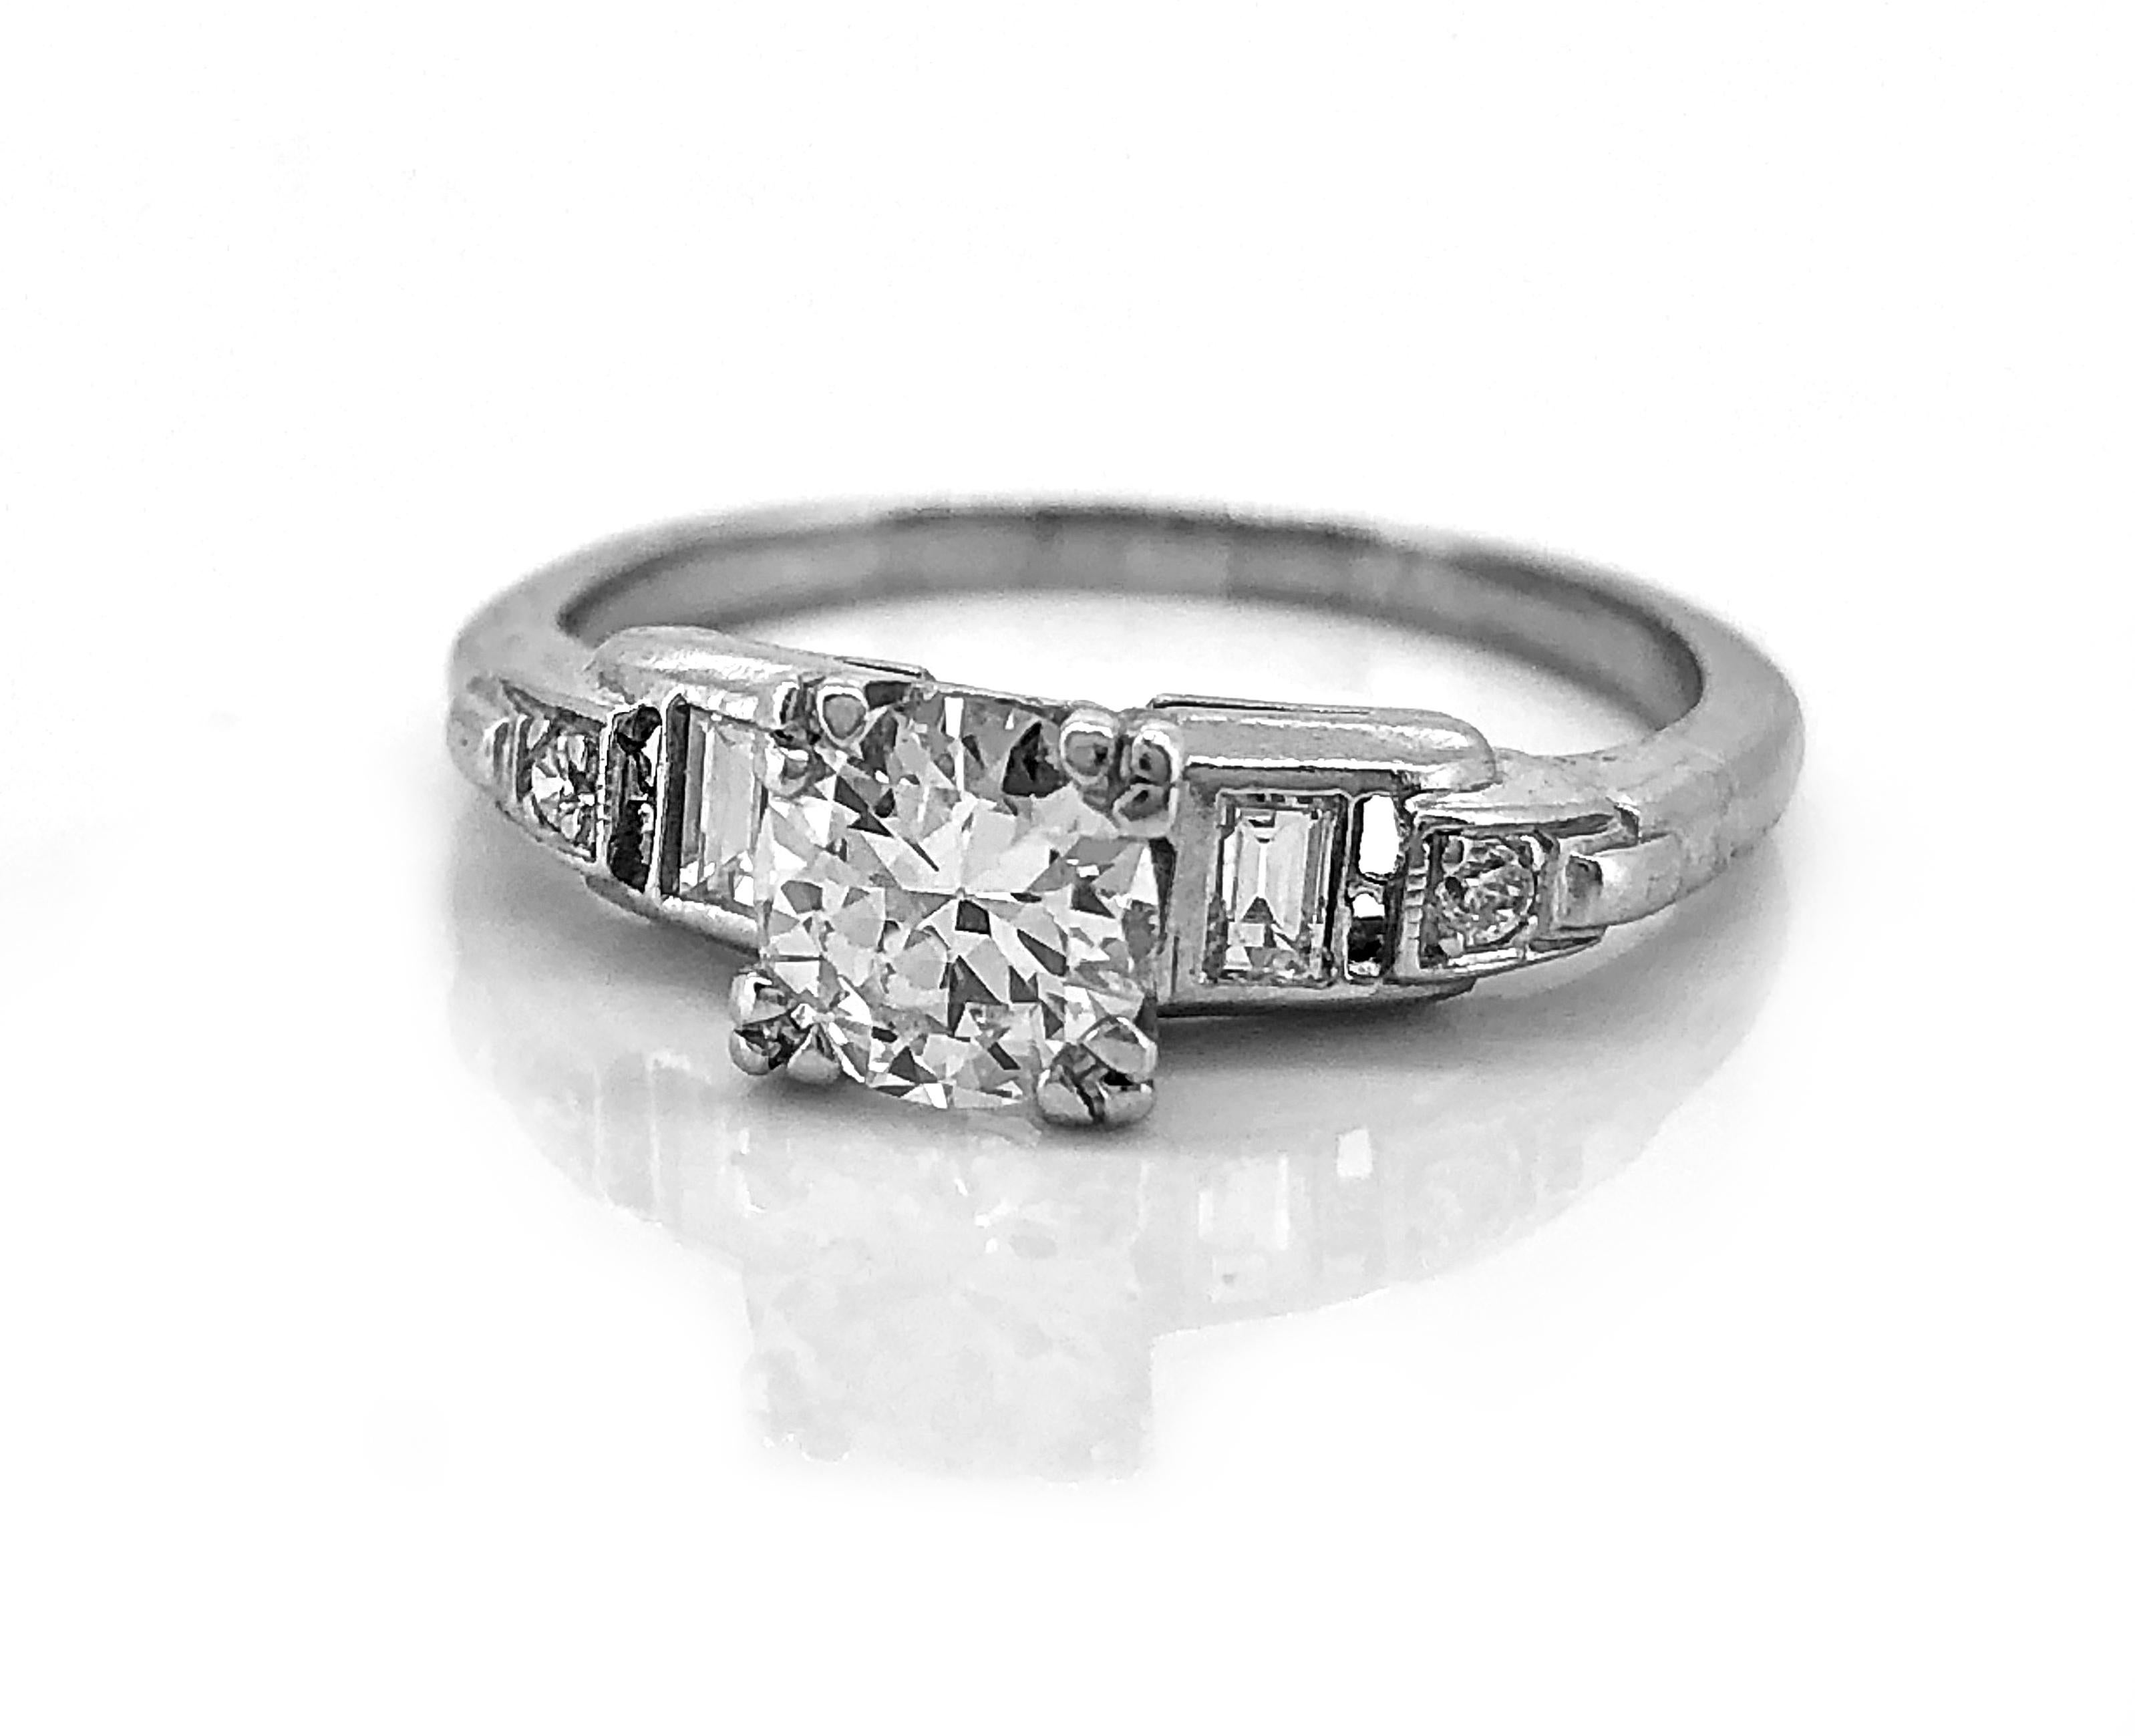 Beautiful baguettes frame this .55ct. diamond and the antique engagement ring is further enhanced by the rectangular cut-outs just beneath the baguettes. Crafted in platinum and accented with small diamonds at the beginning of the design portion of